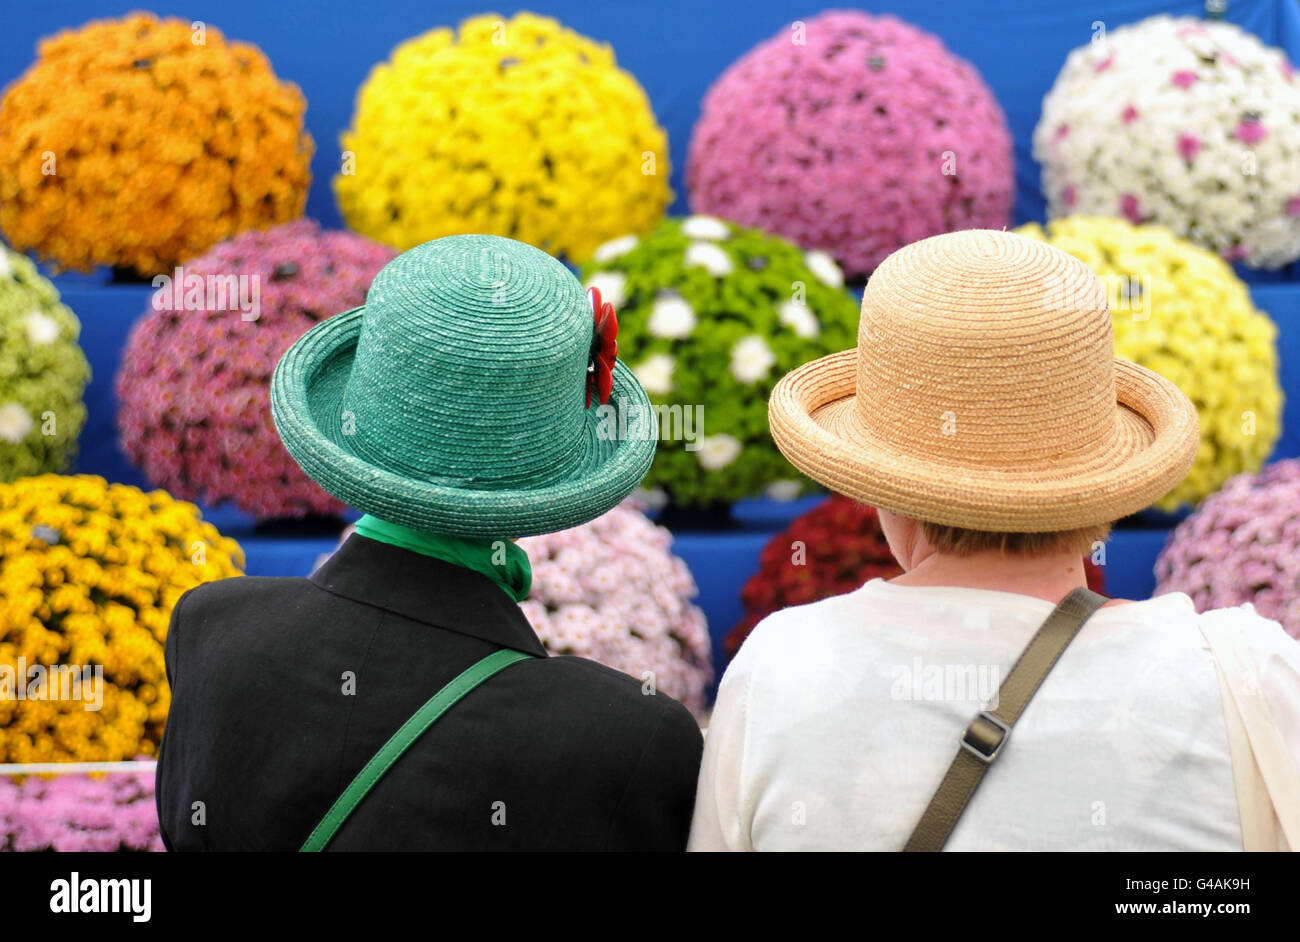 Visitors view a floral display at the Chelsea Flower Show. Stock Photo